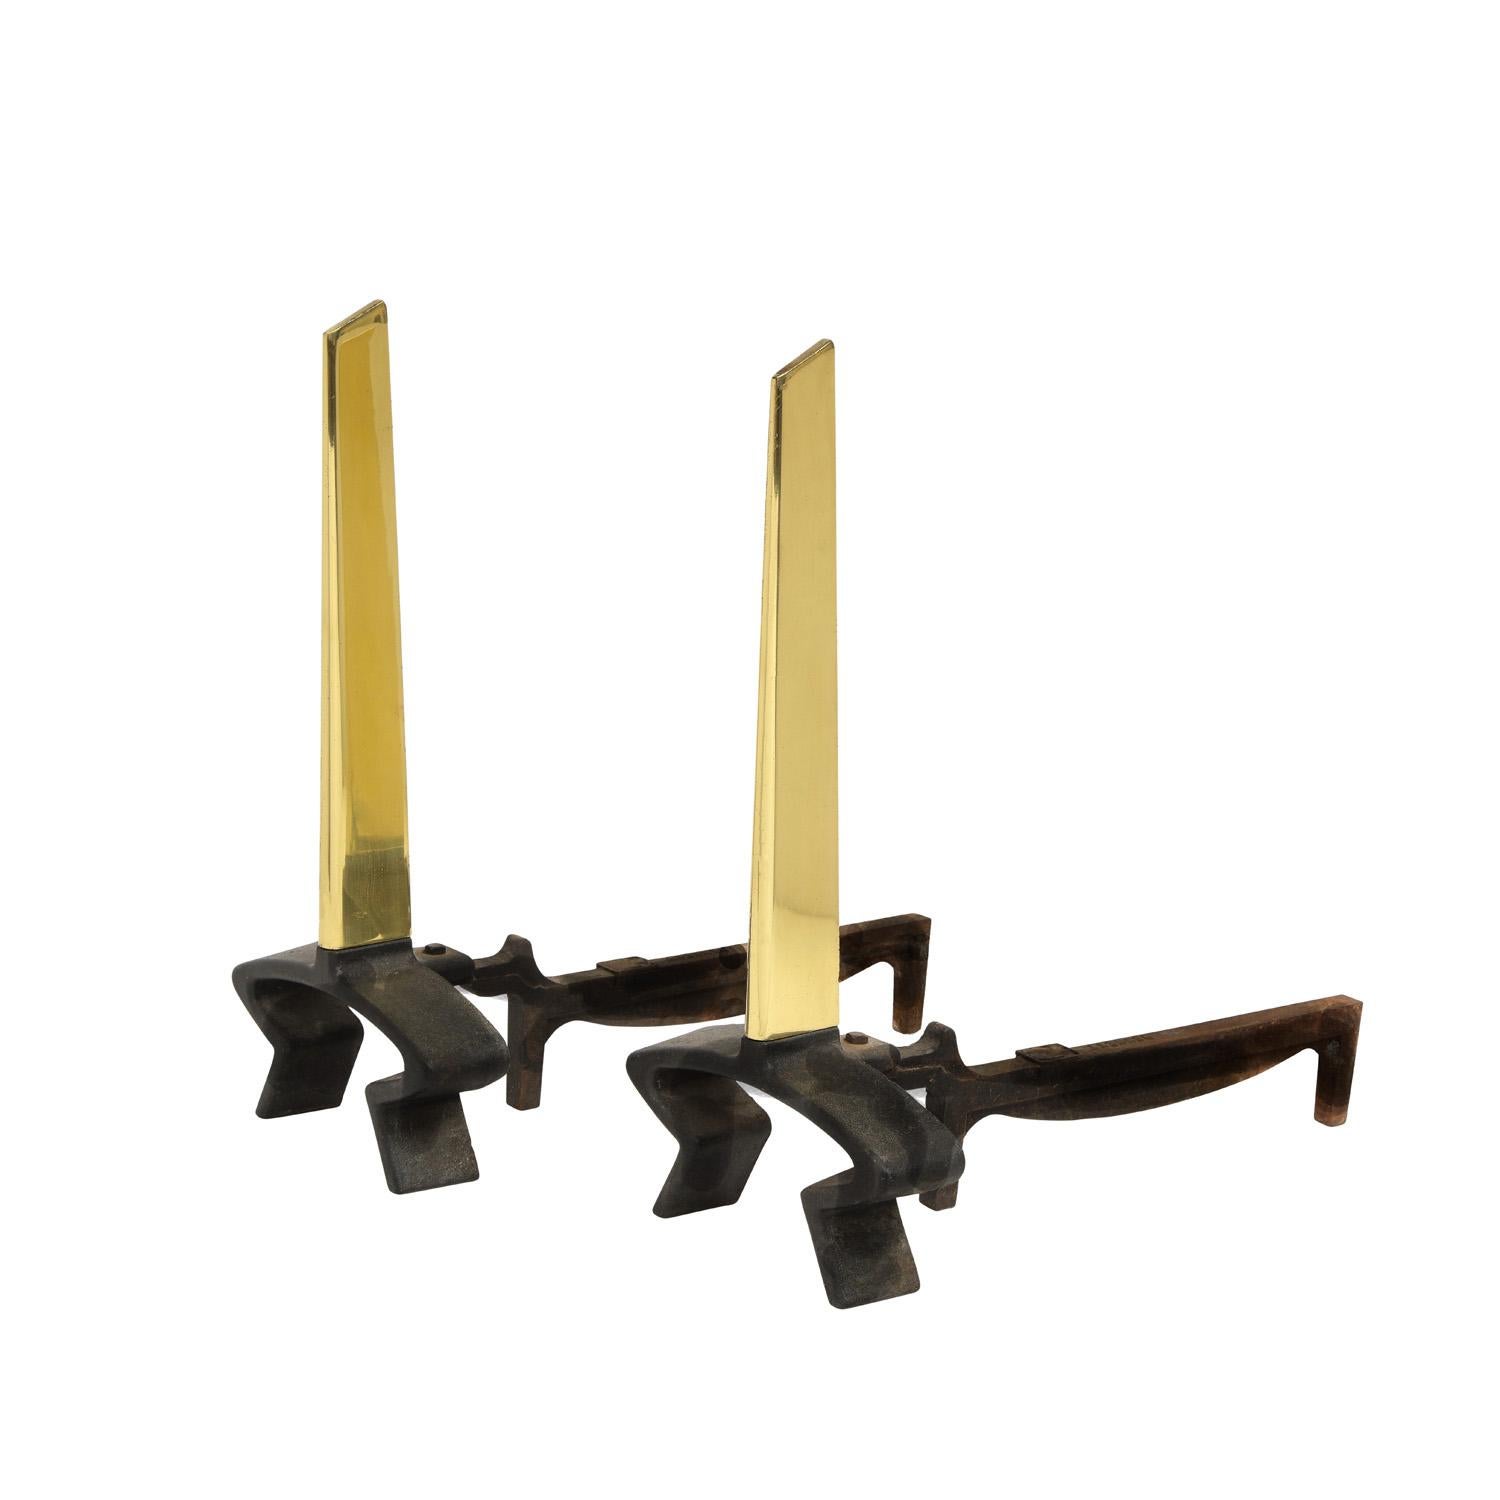 Pair of andirons in wrought iron with polished brass fins by Donald Deskey for Bennett, American 1950's (signed “Bennett” on shanks).  Deskey, a legendary designer created beautiful andirons.  These have been completely restored - brass polished and